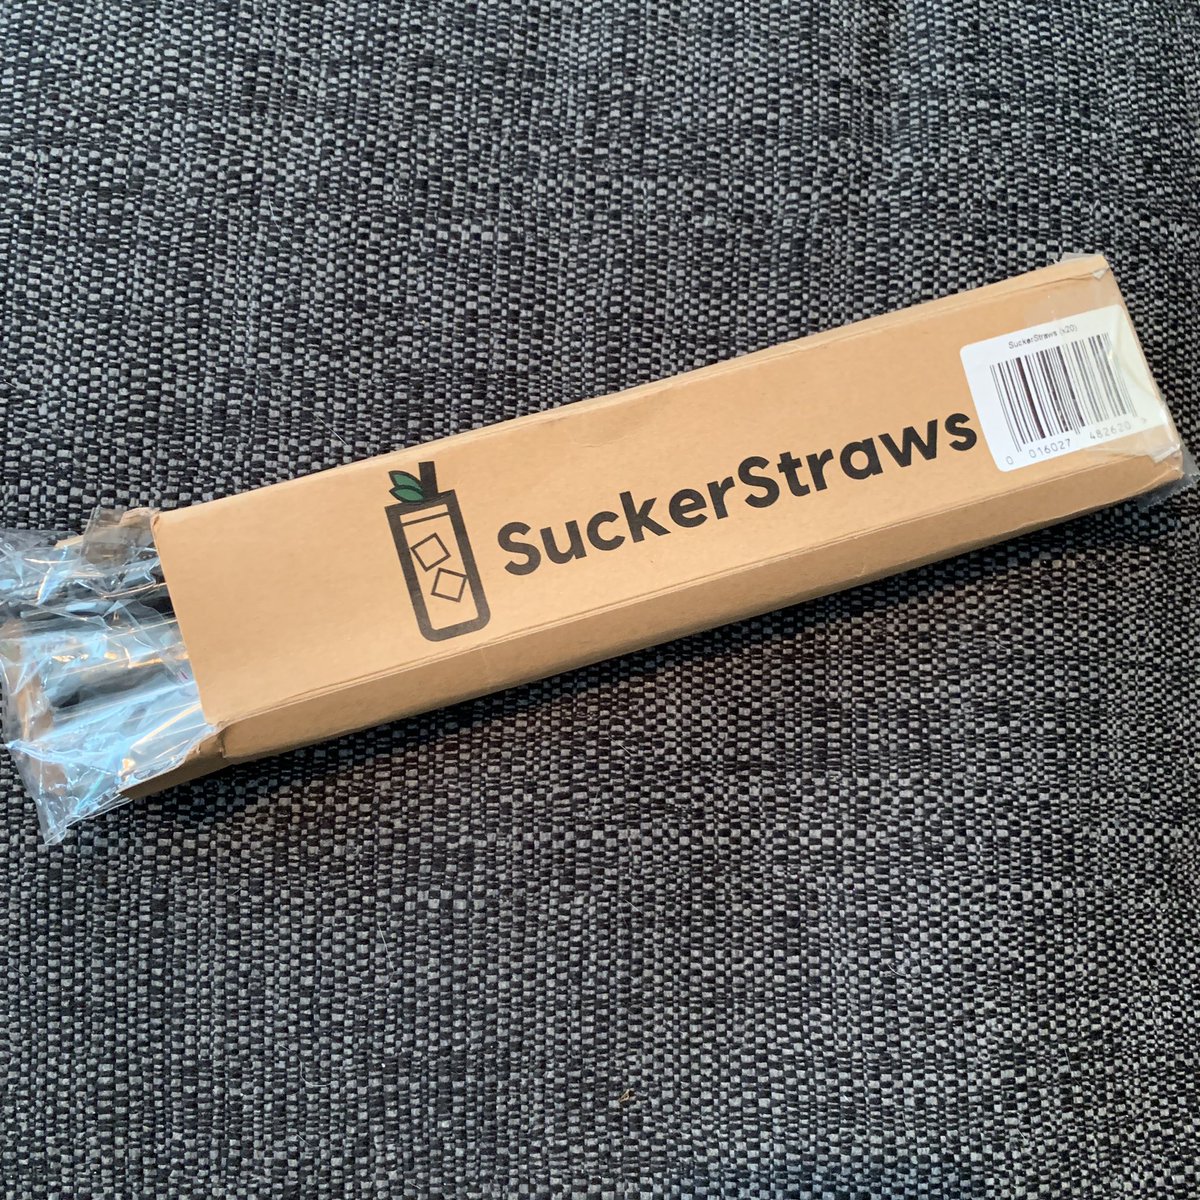 Yay! Delivery has arrived! Looking forward to trialling these Sucker Straws at our next party. 🙌 #colplasticpledge